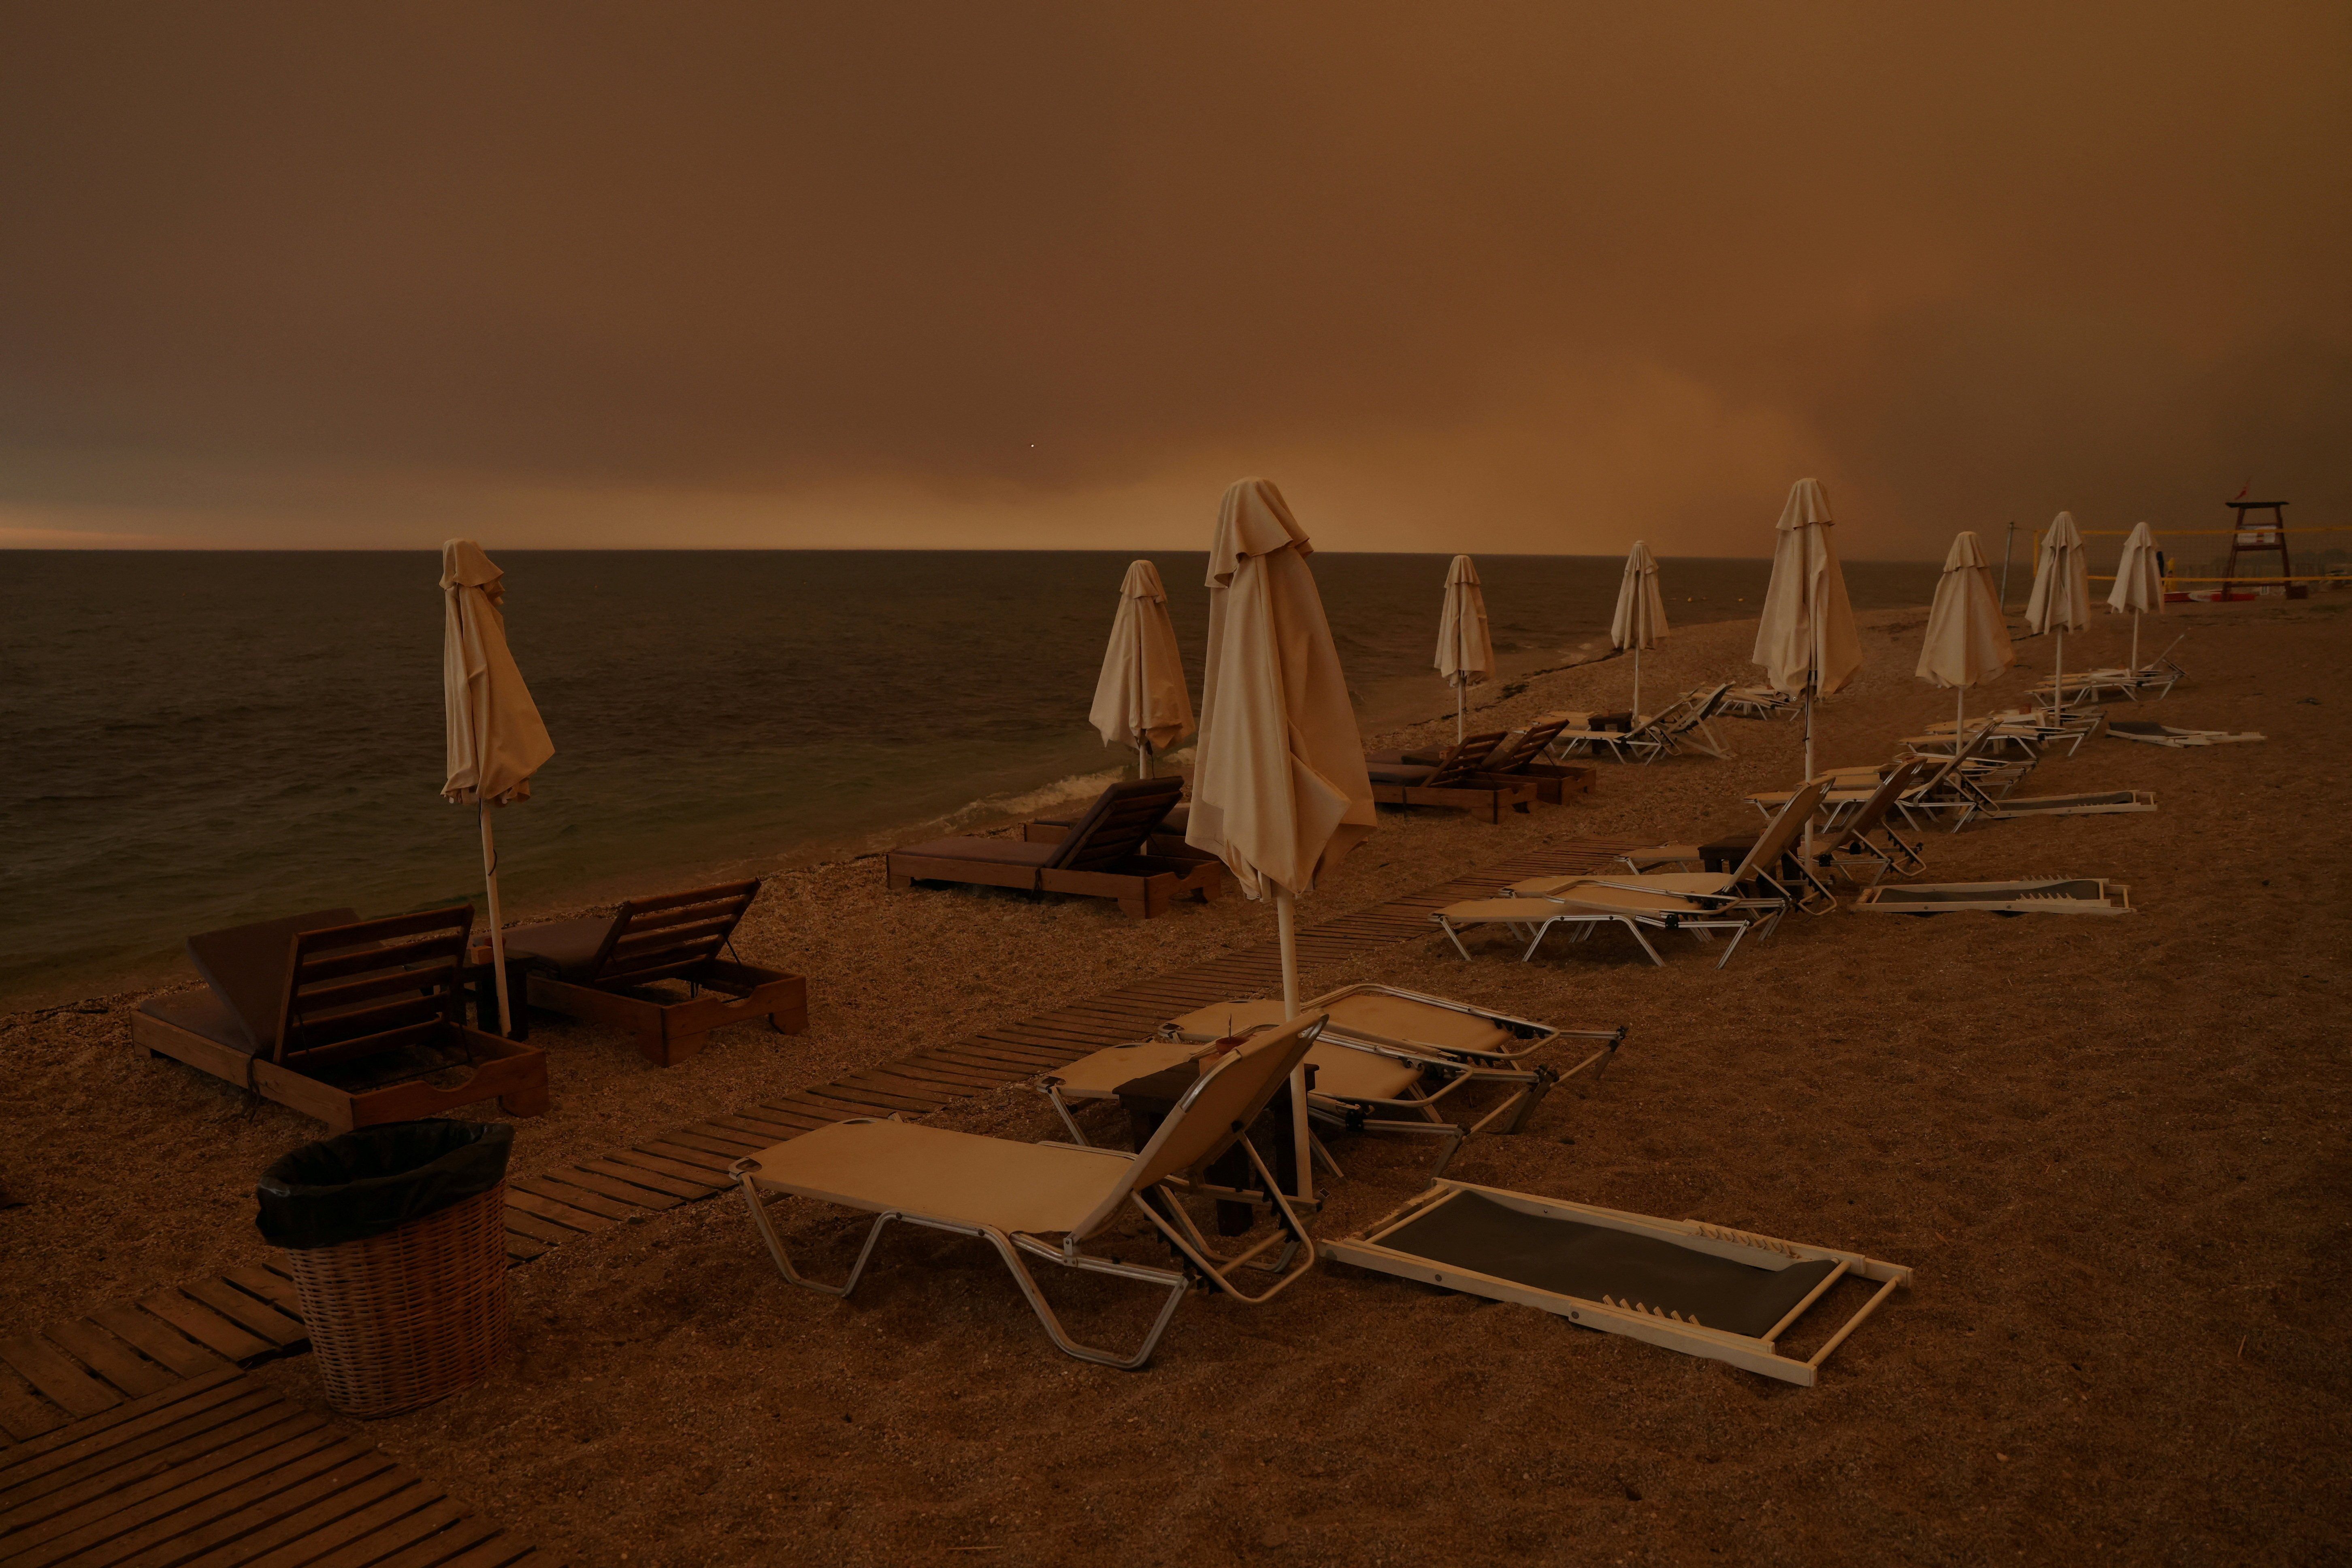 Smoke rises next to sunbeams and umbrellas as a wildfire burns, at the beach of the village of Dikella in the region of Evros, Greece.